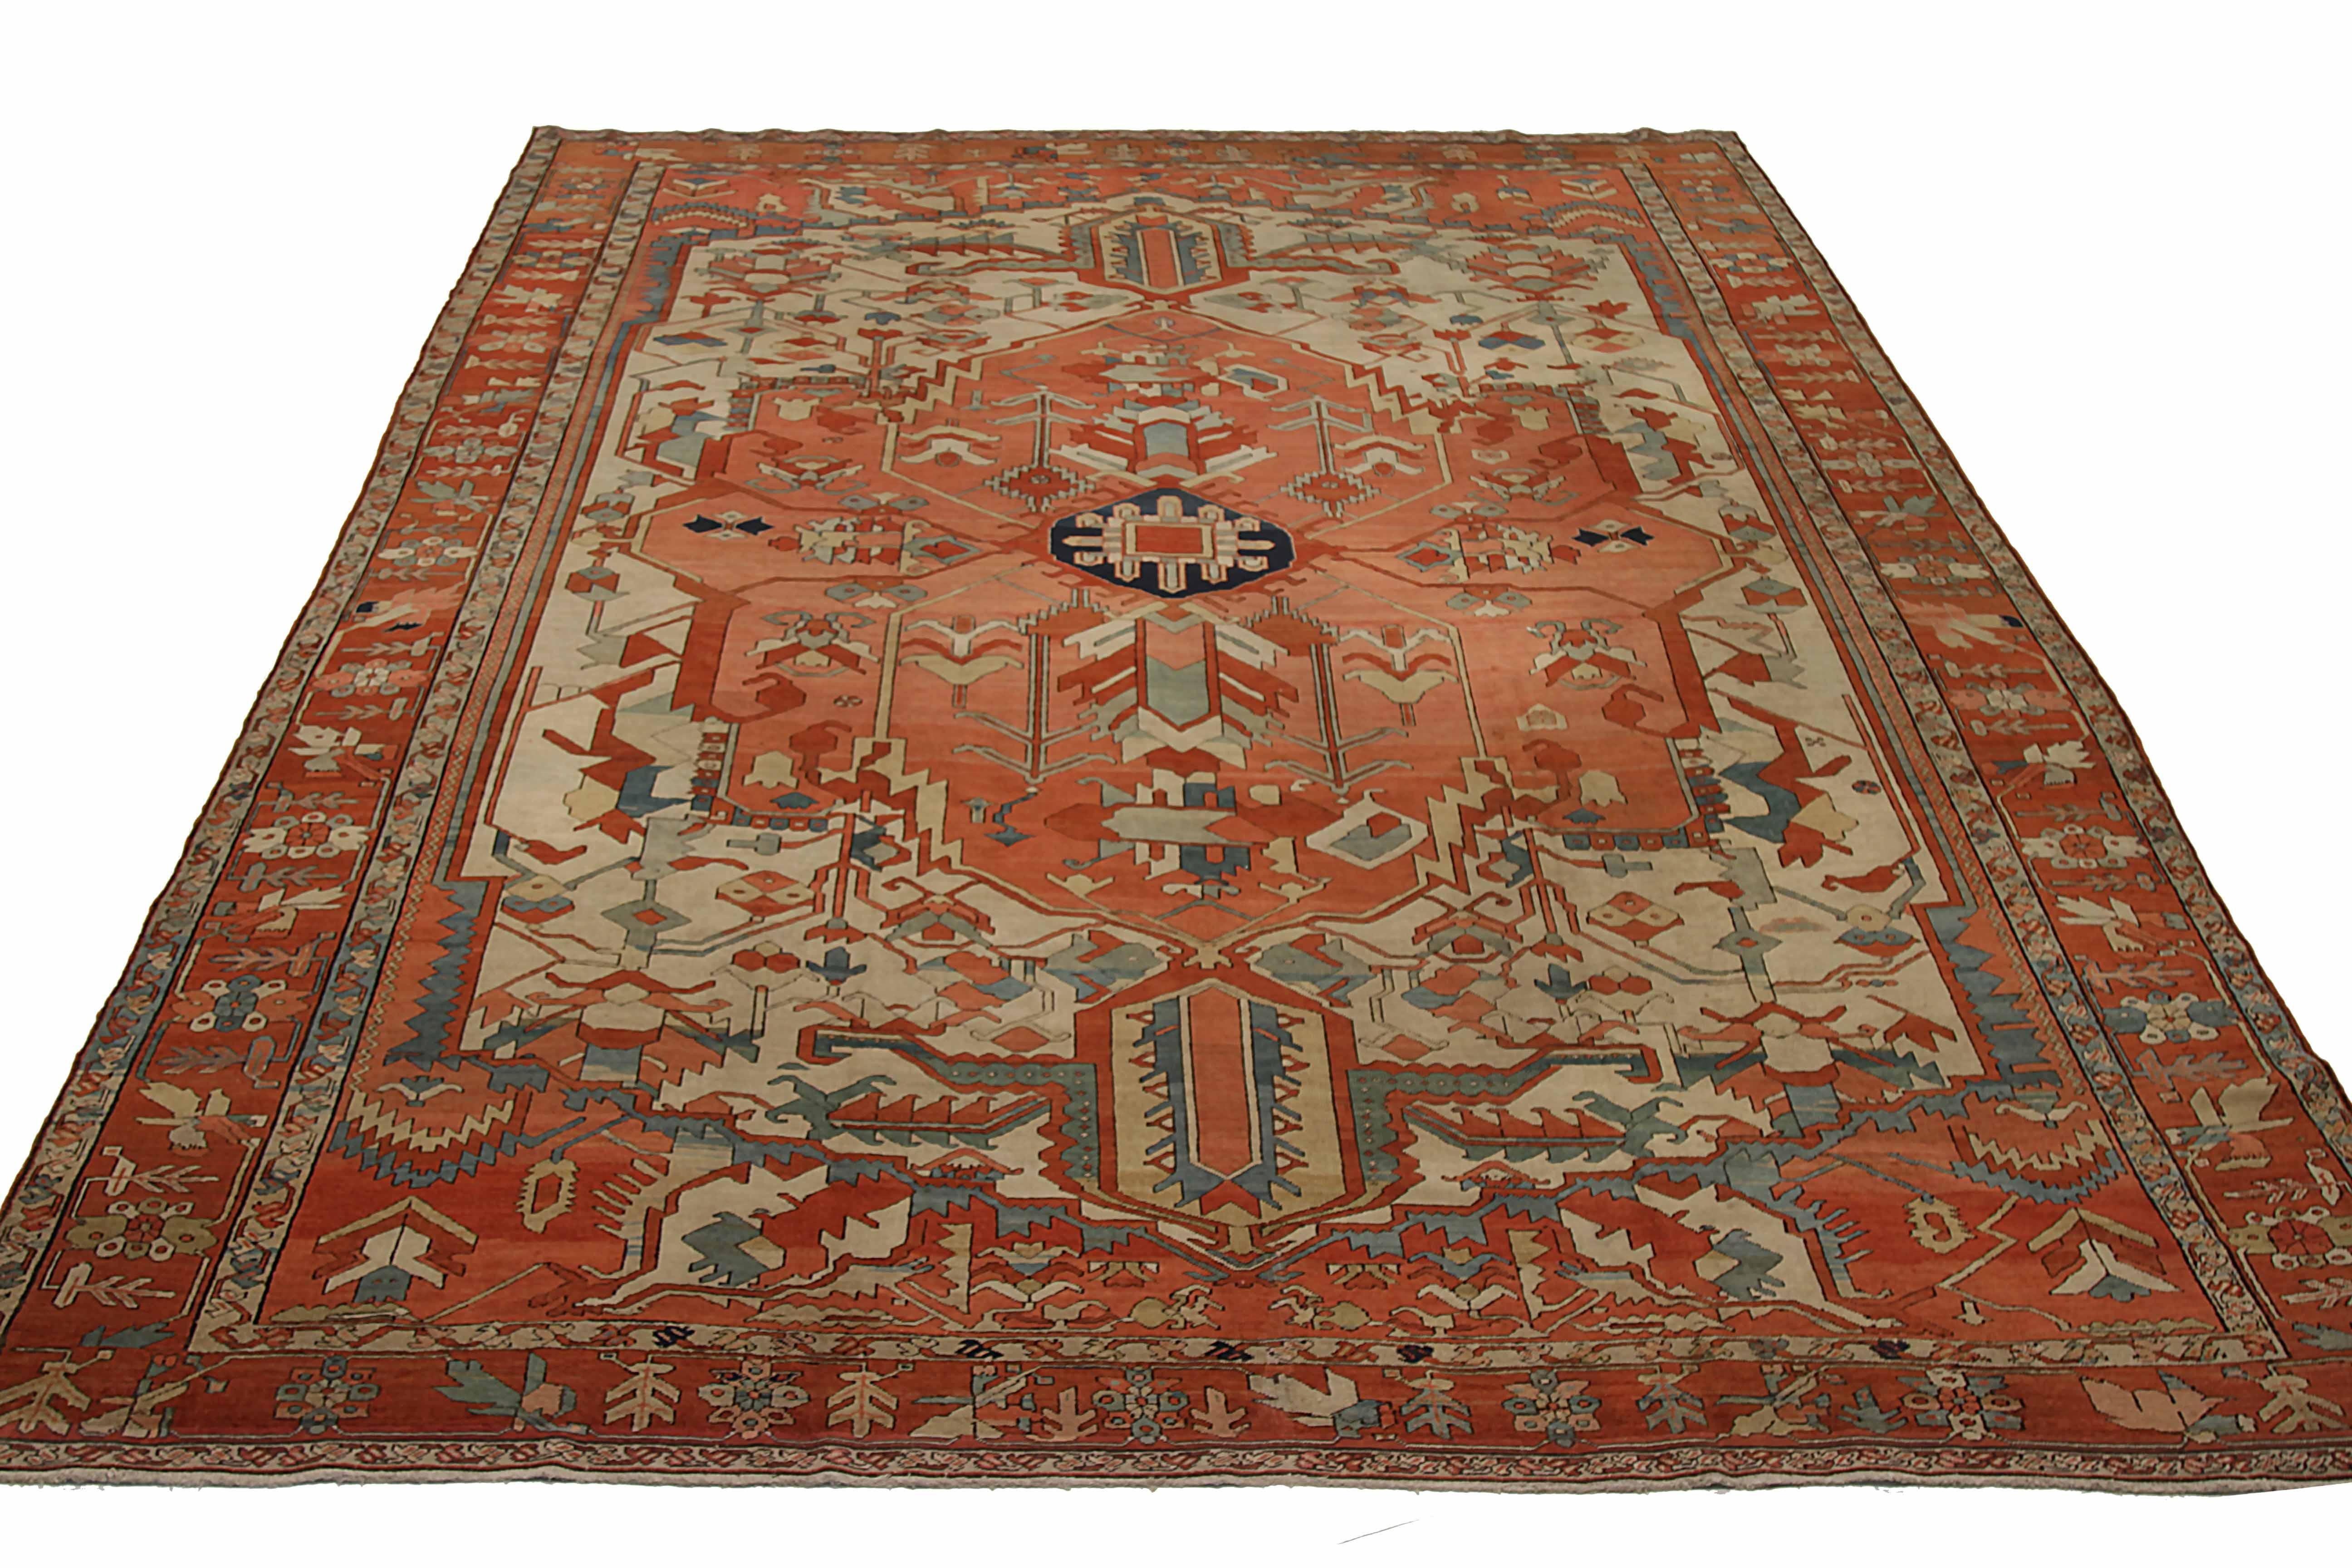 Antique area rug handwoven from the finest sheep’s wool. It’s colored with all-natural vegetable dyes that are safe for humans and pets. It’s a traditional Serapi design handwoven by expert artisans. It’s a lovely area rug that can be incorporated